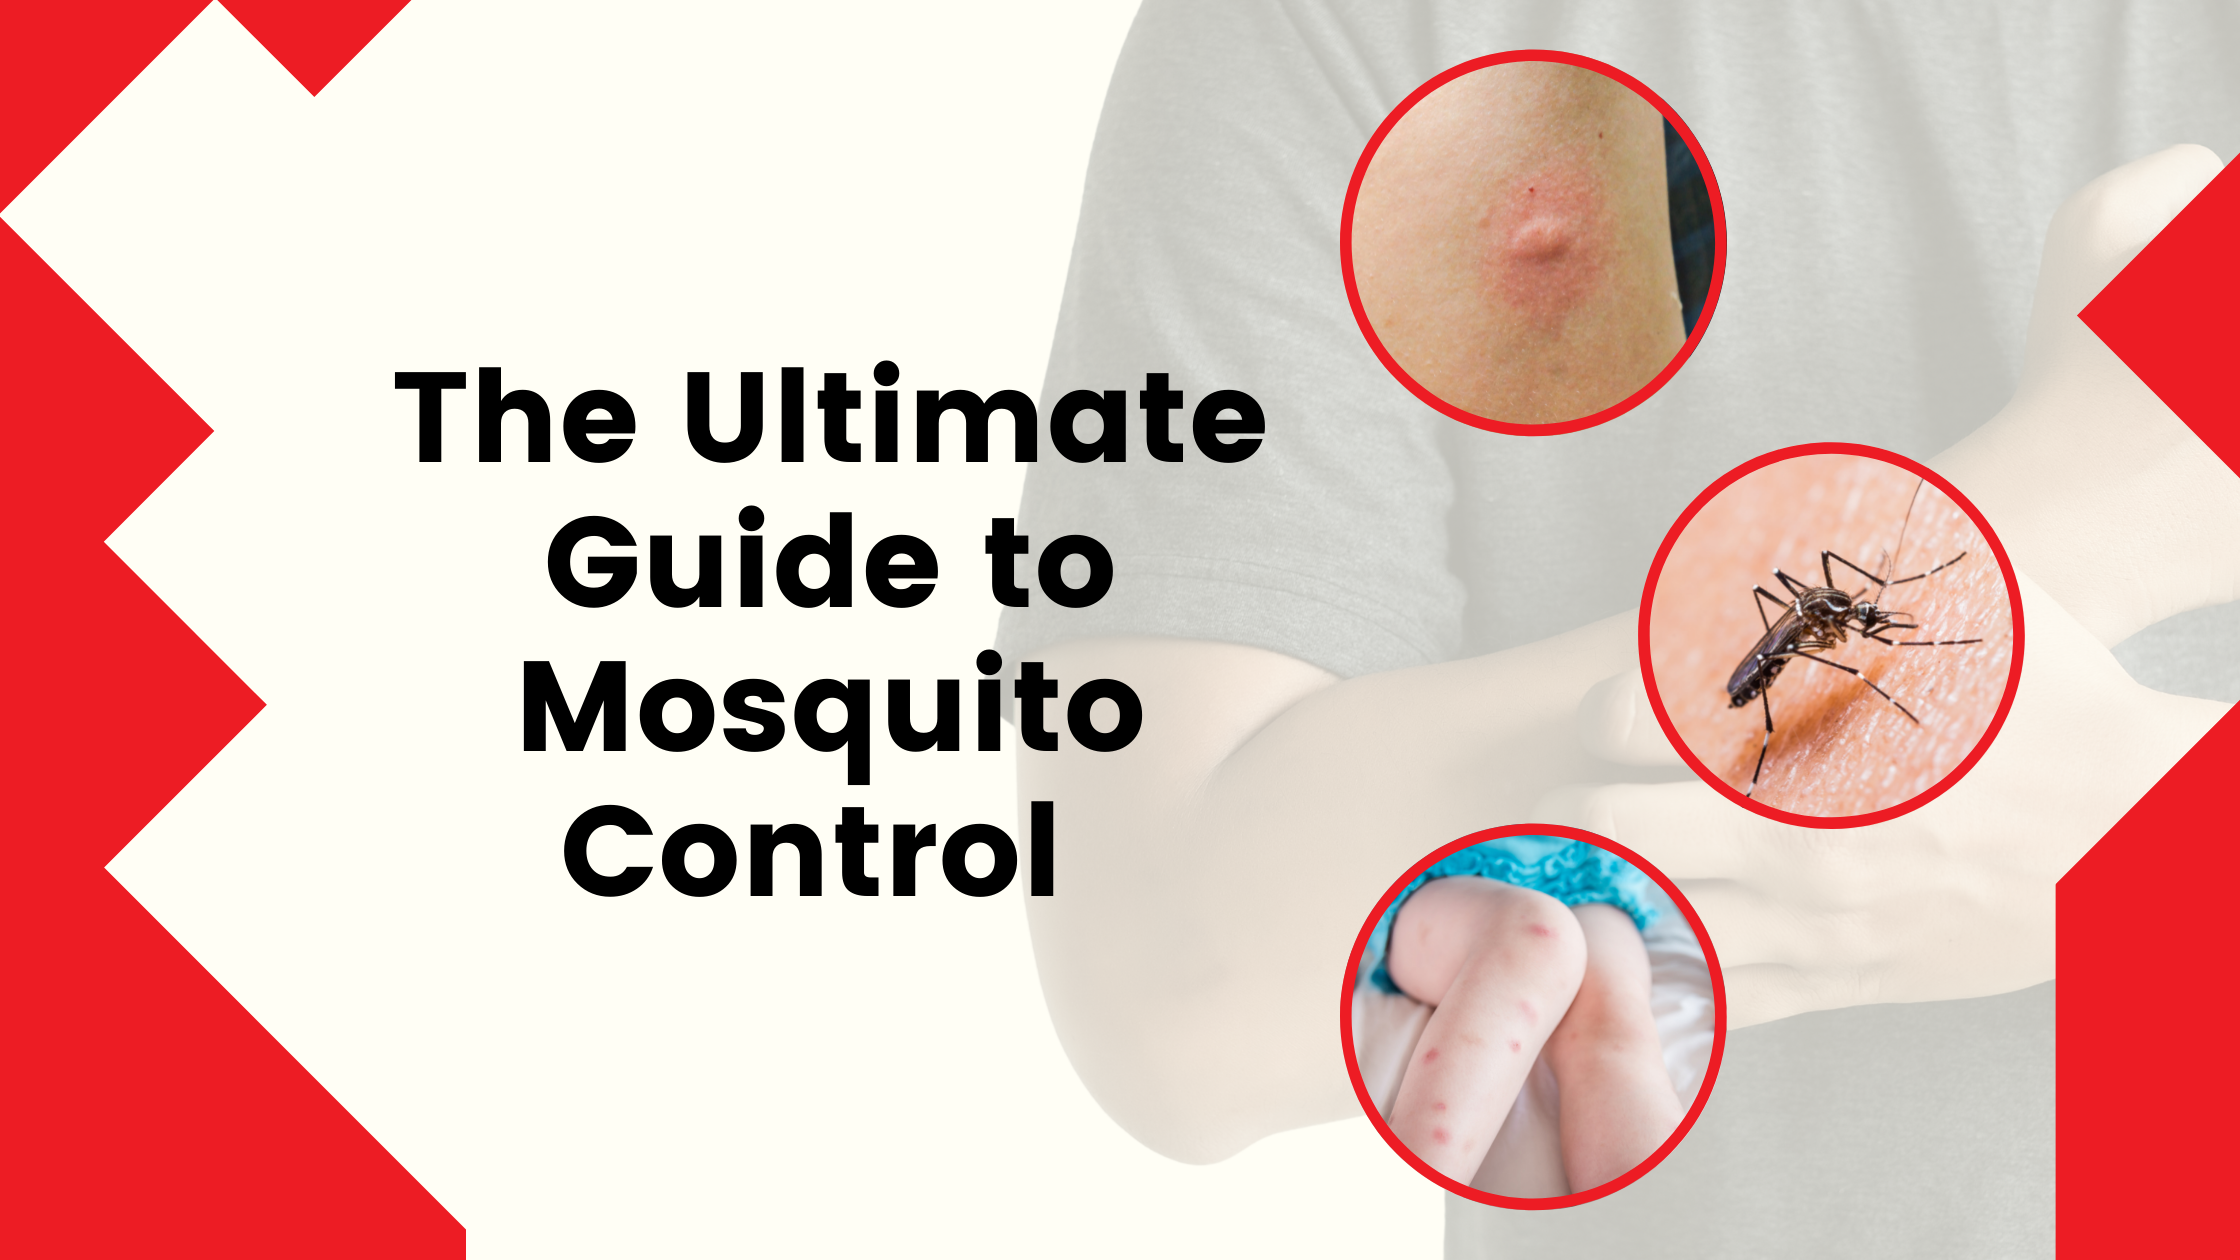 The Ultimate Guide to Mosquito Control